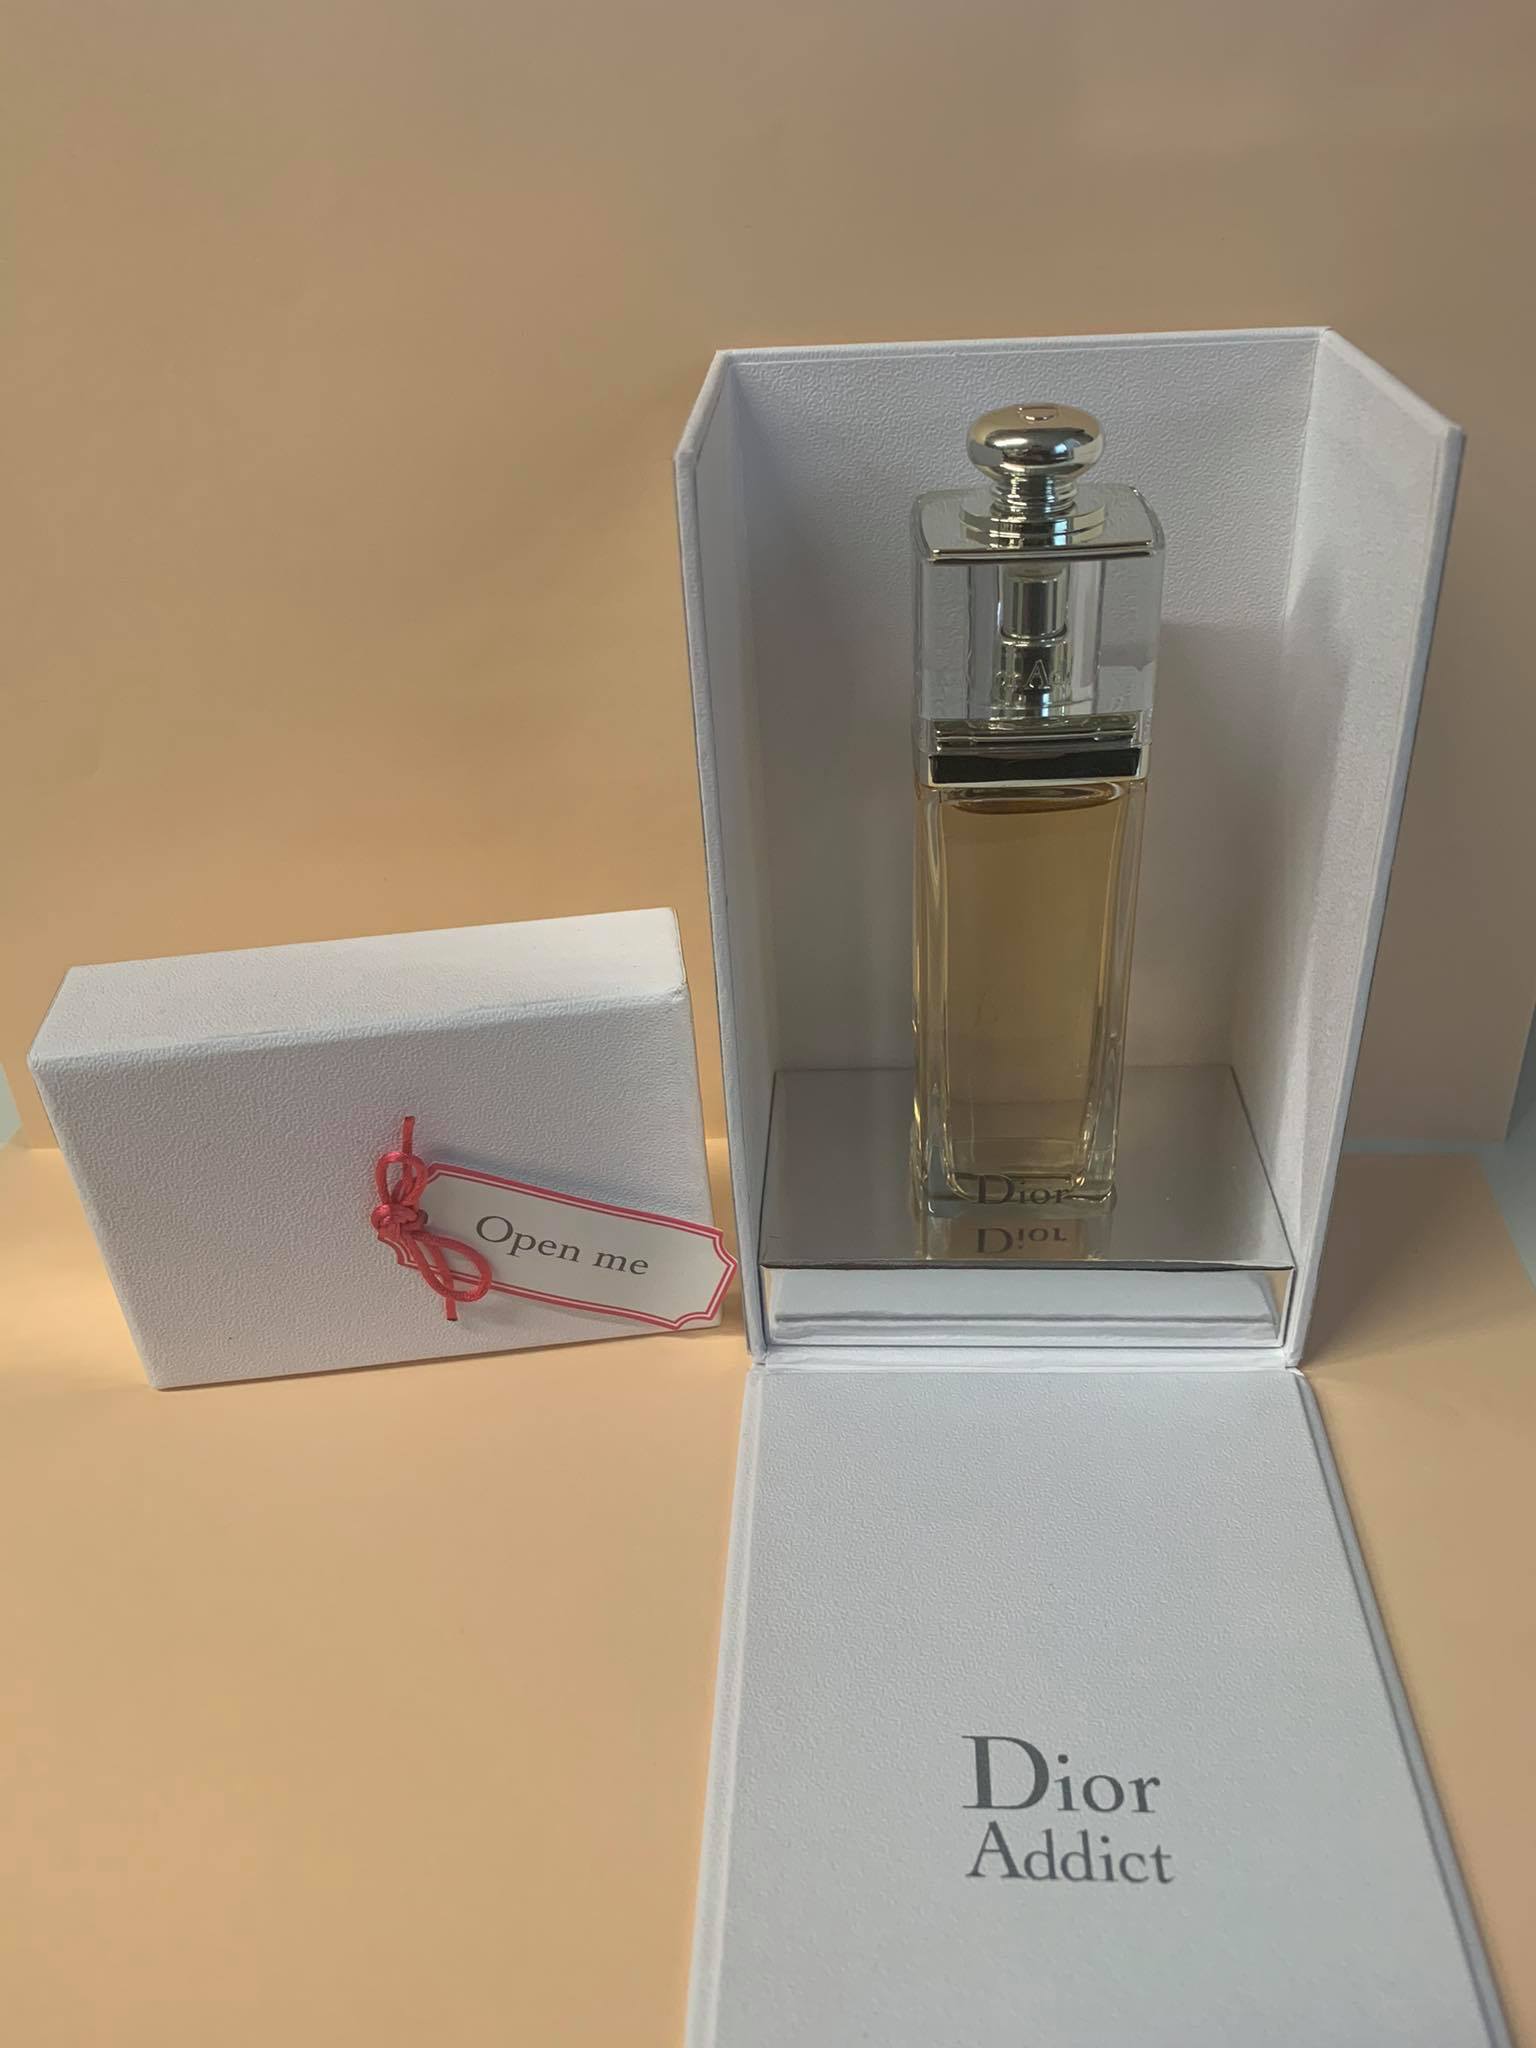 Christian Dior Addict, edt 50ml - Luxury gift package